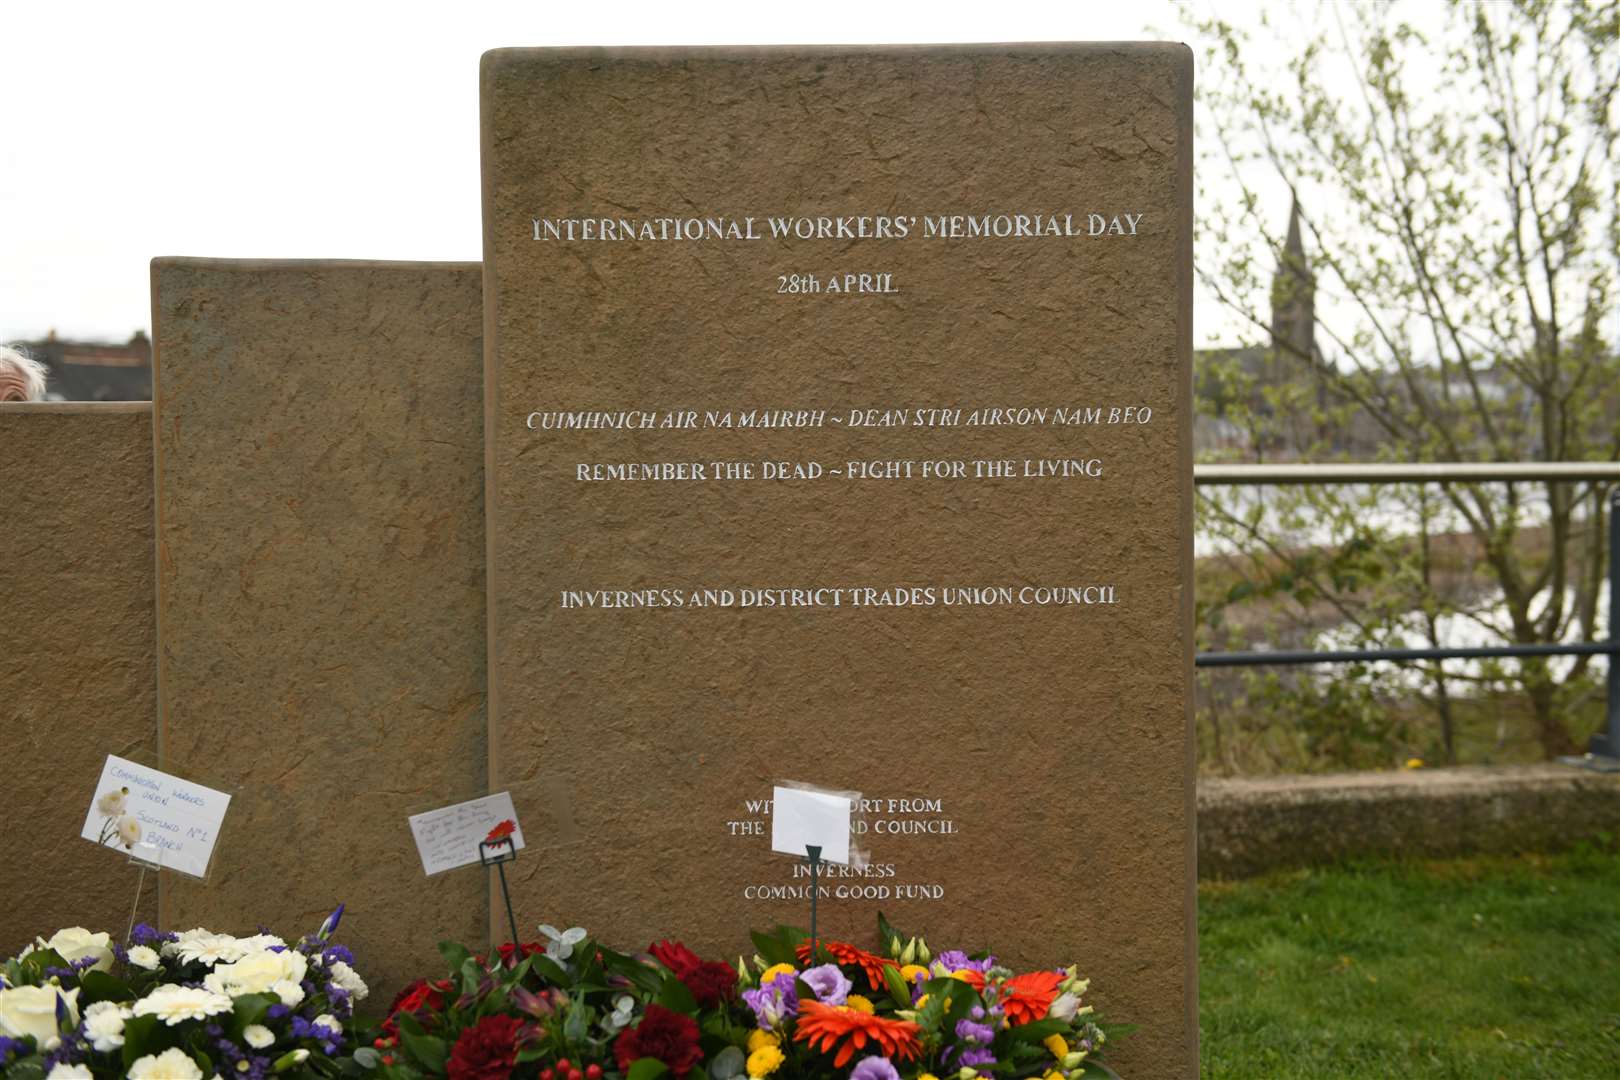 The Inverness workers' memorial by the River Ness was the focus of a ceremony to mark International Workers' Memorial Day.